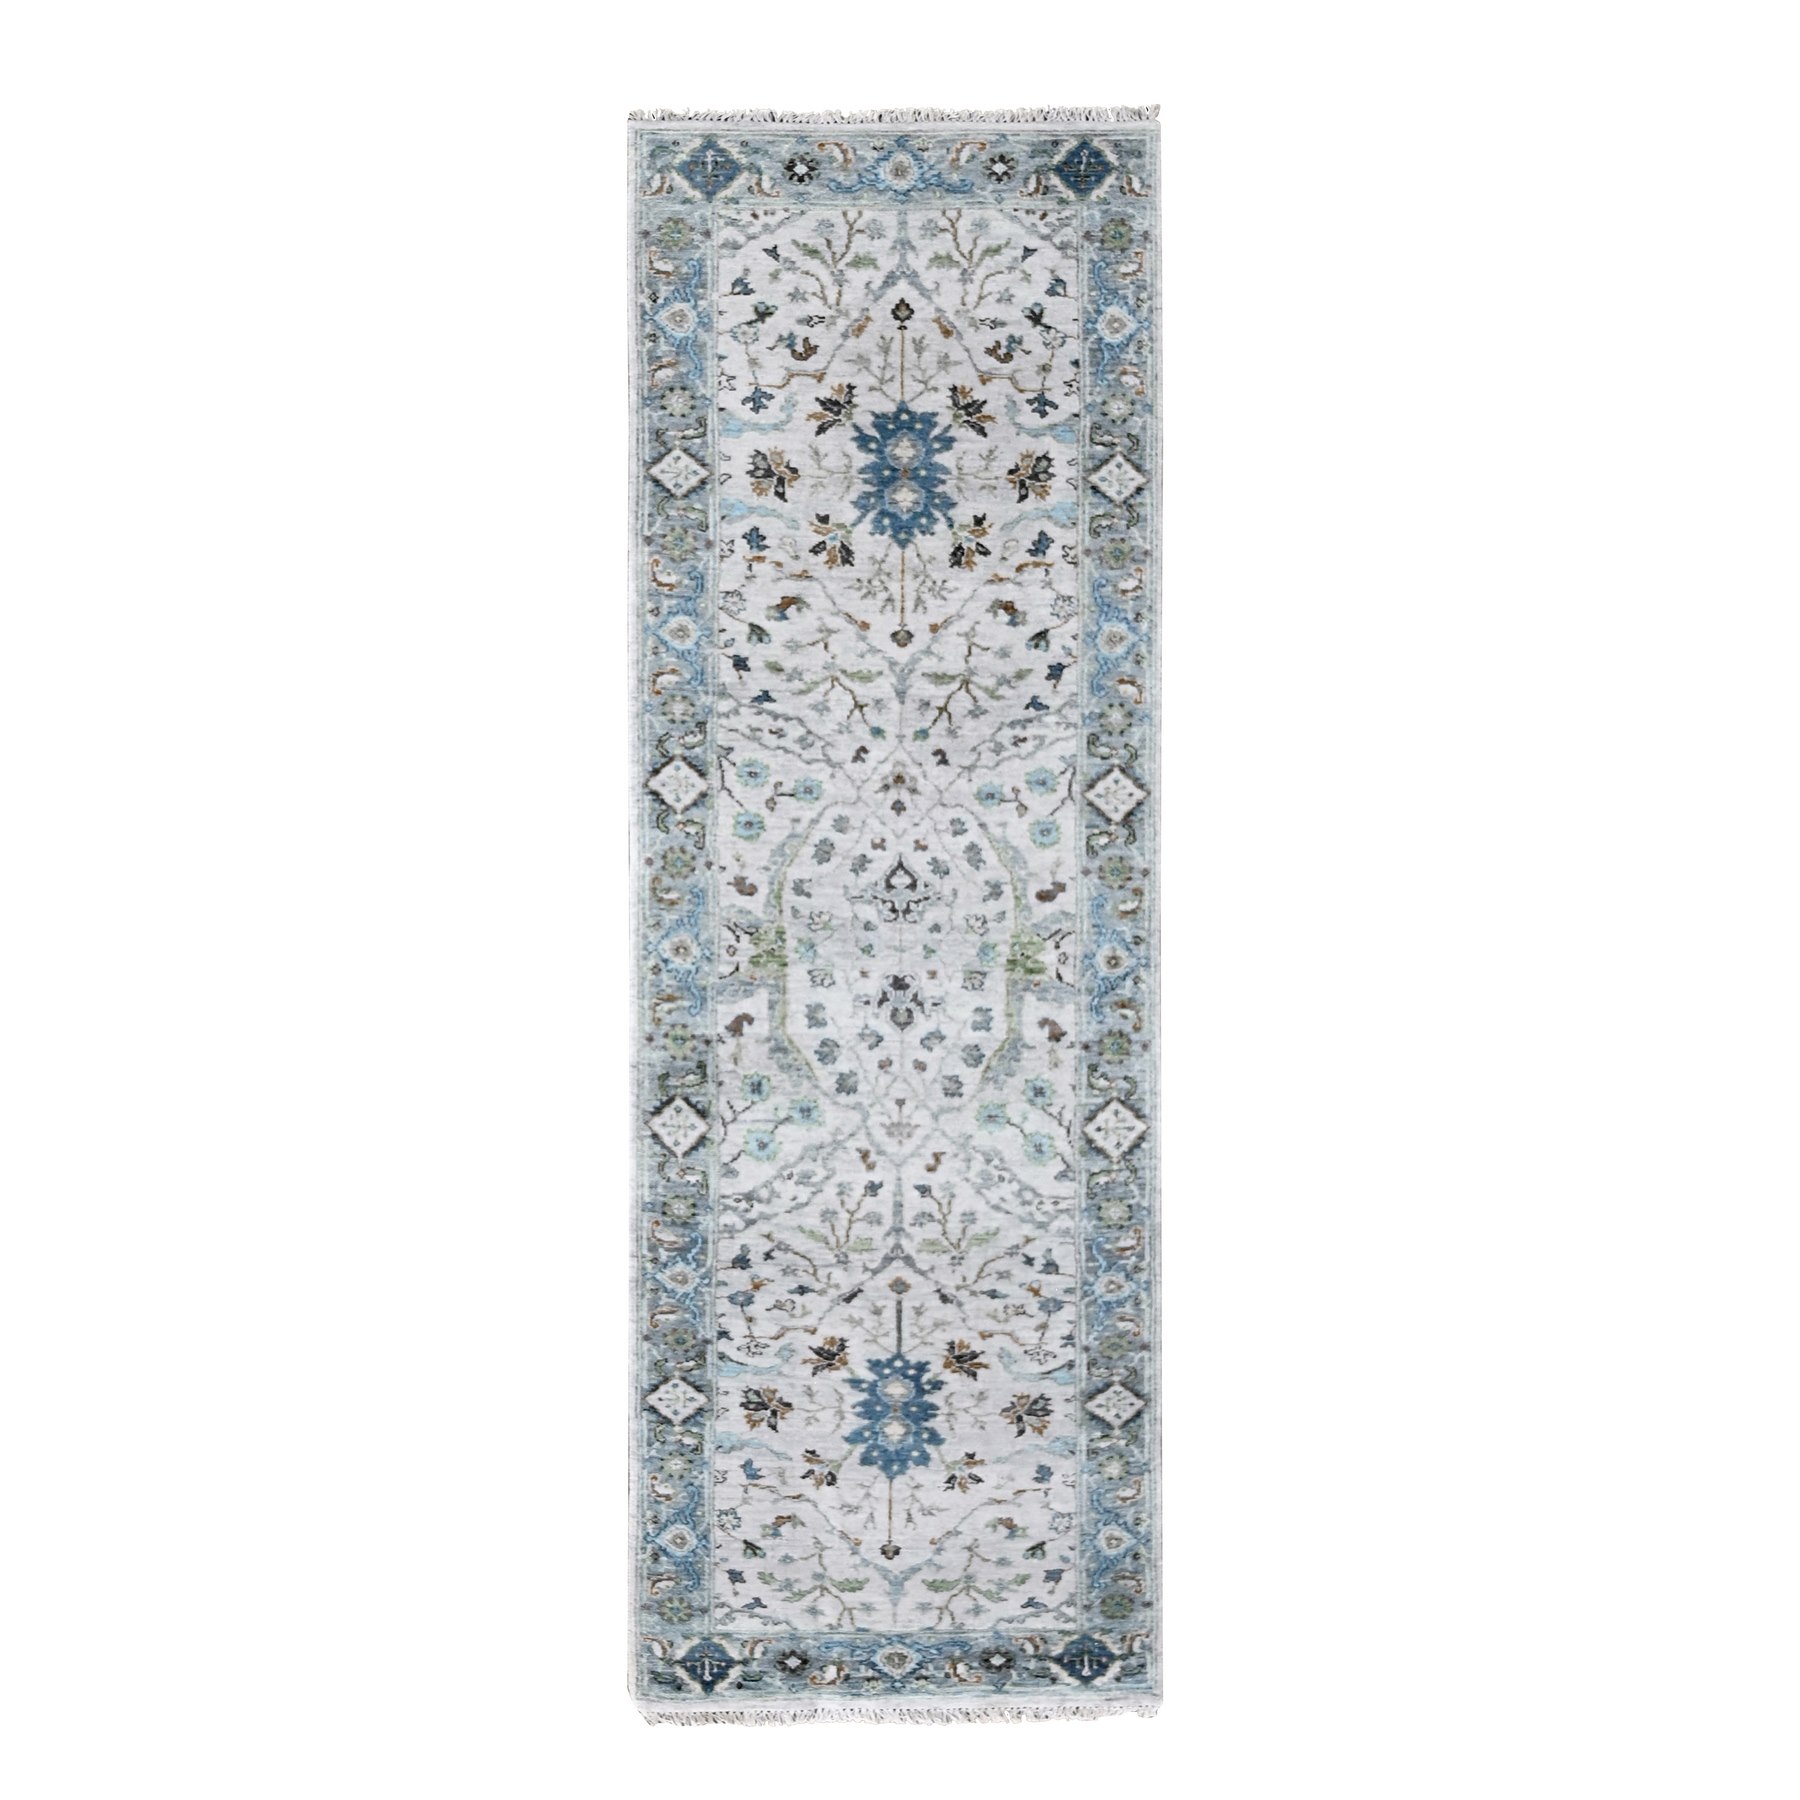 Miller Mood Gray, Velvety and Soft Wool, Densely Woven, Hand Knotted, Floral Motifs Oushak Design Oriental Runner 